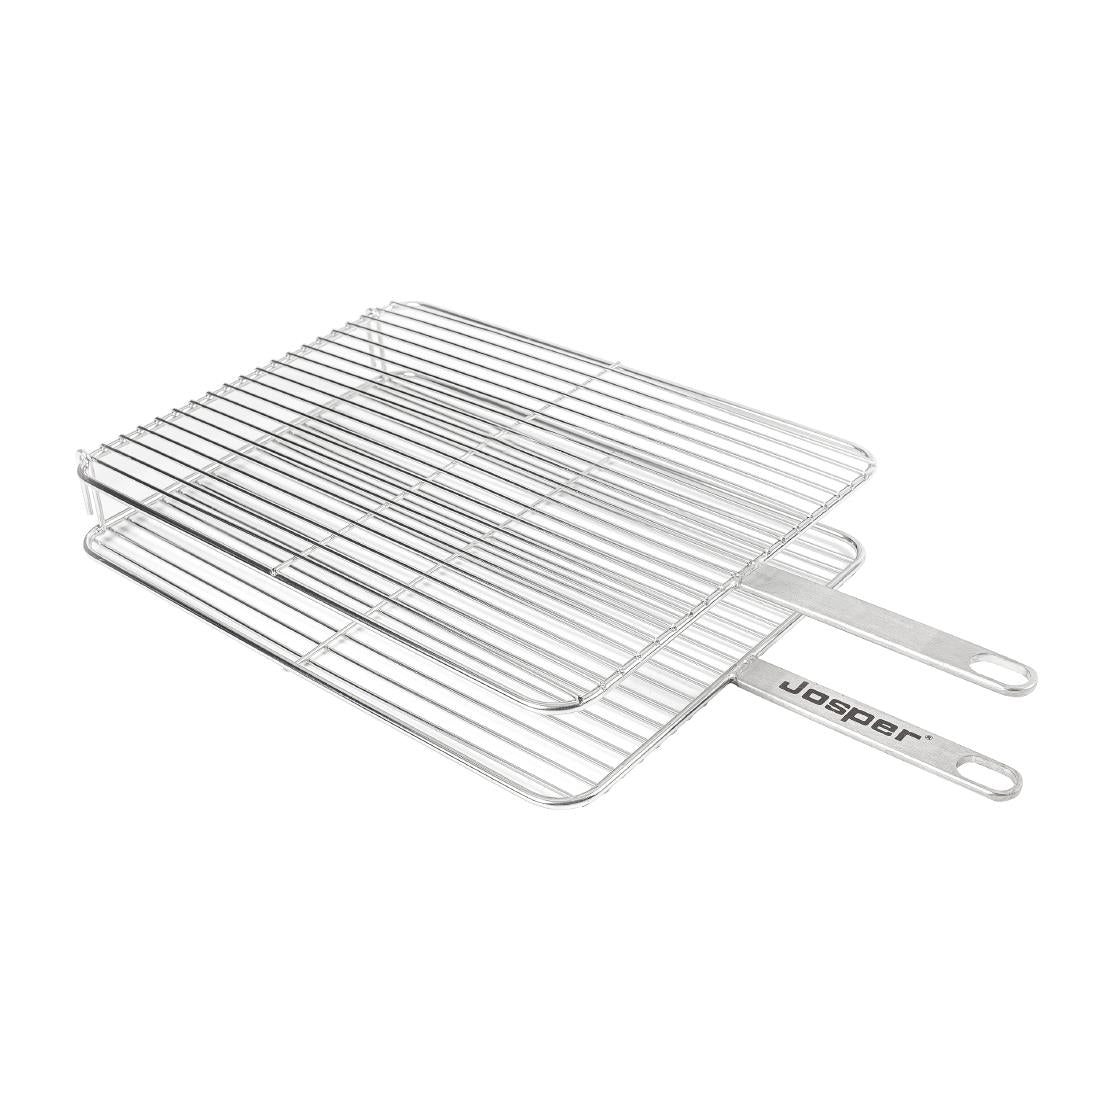 AT305 Josper Charcoal Oven Double Square Grill Grate 300x400mm